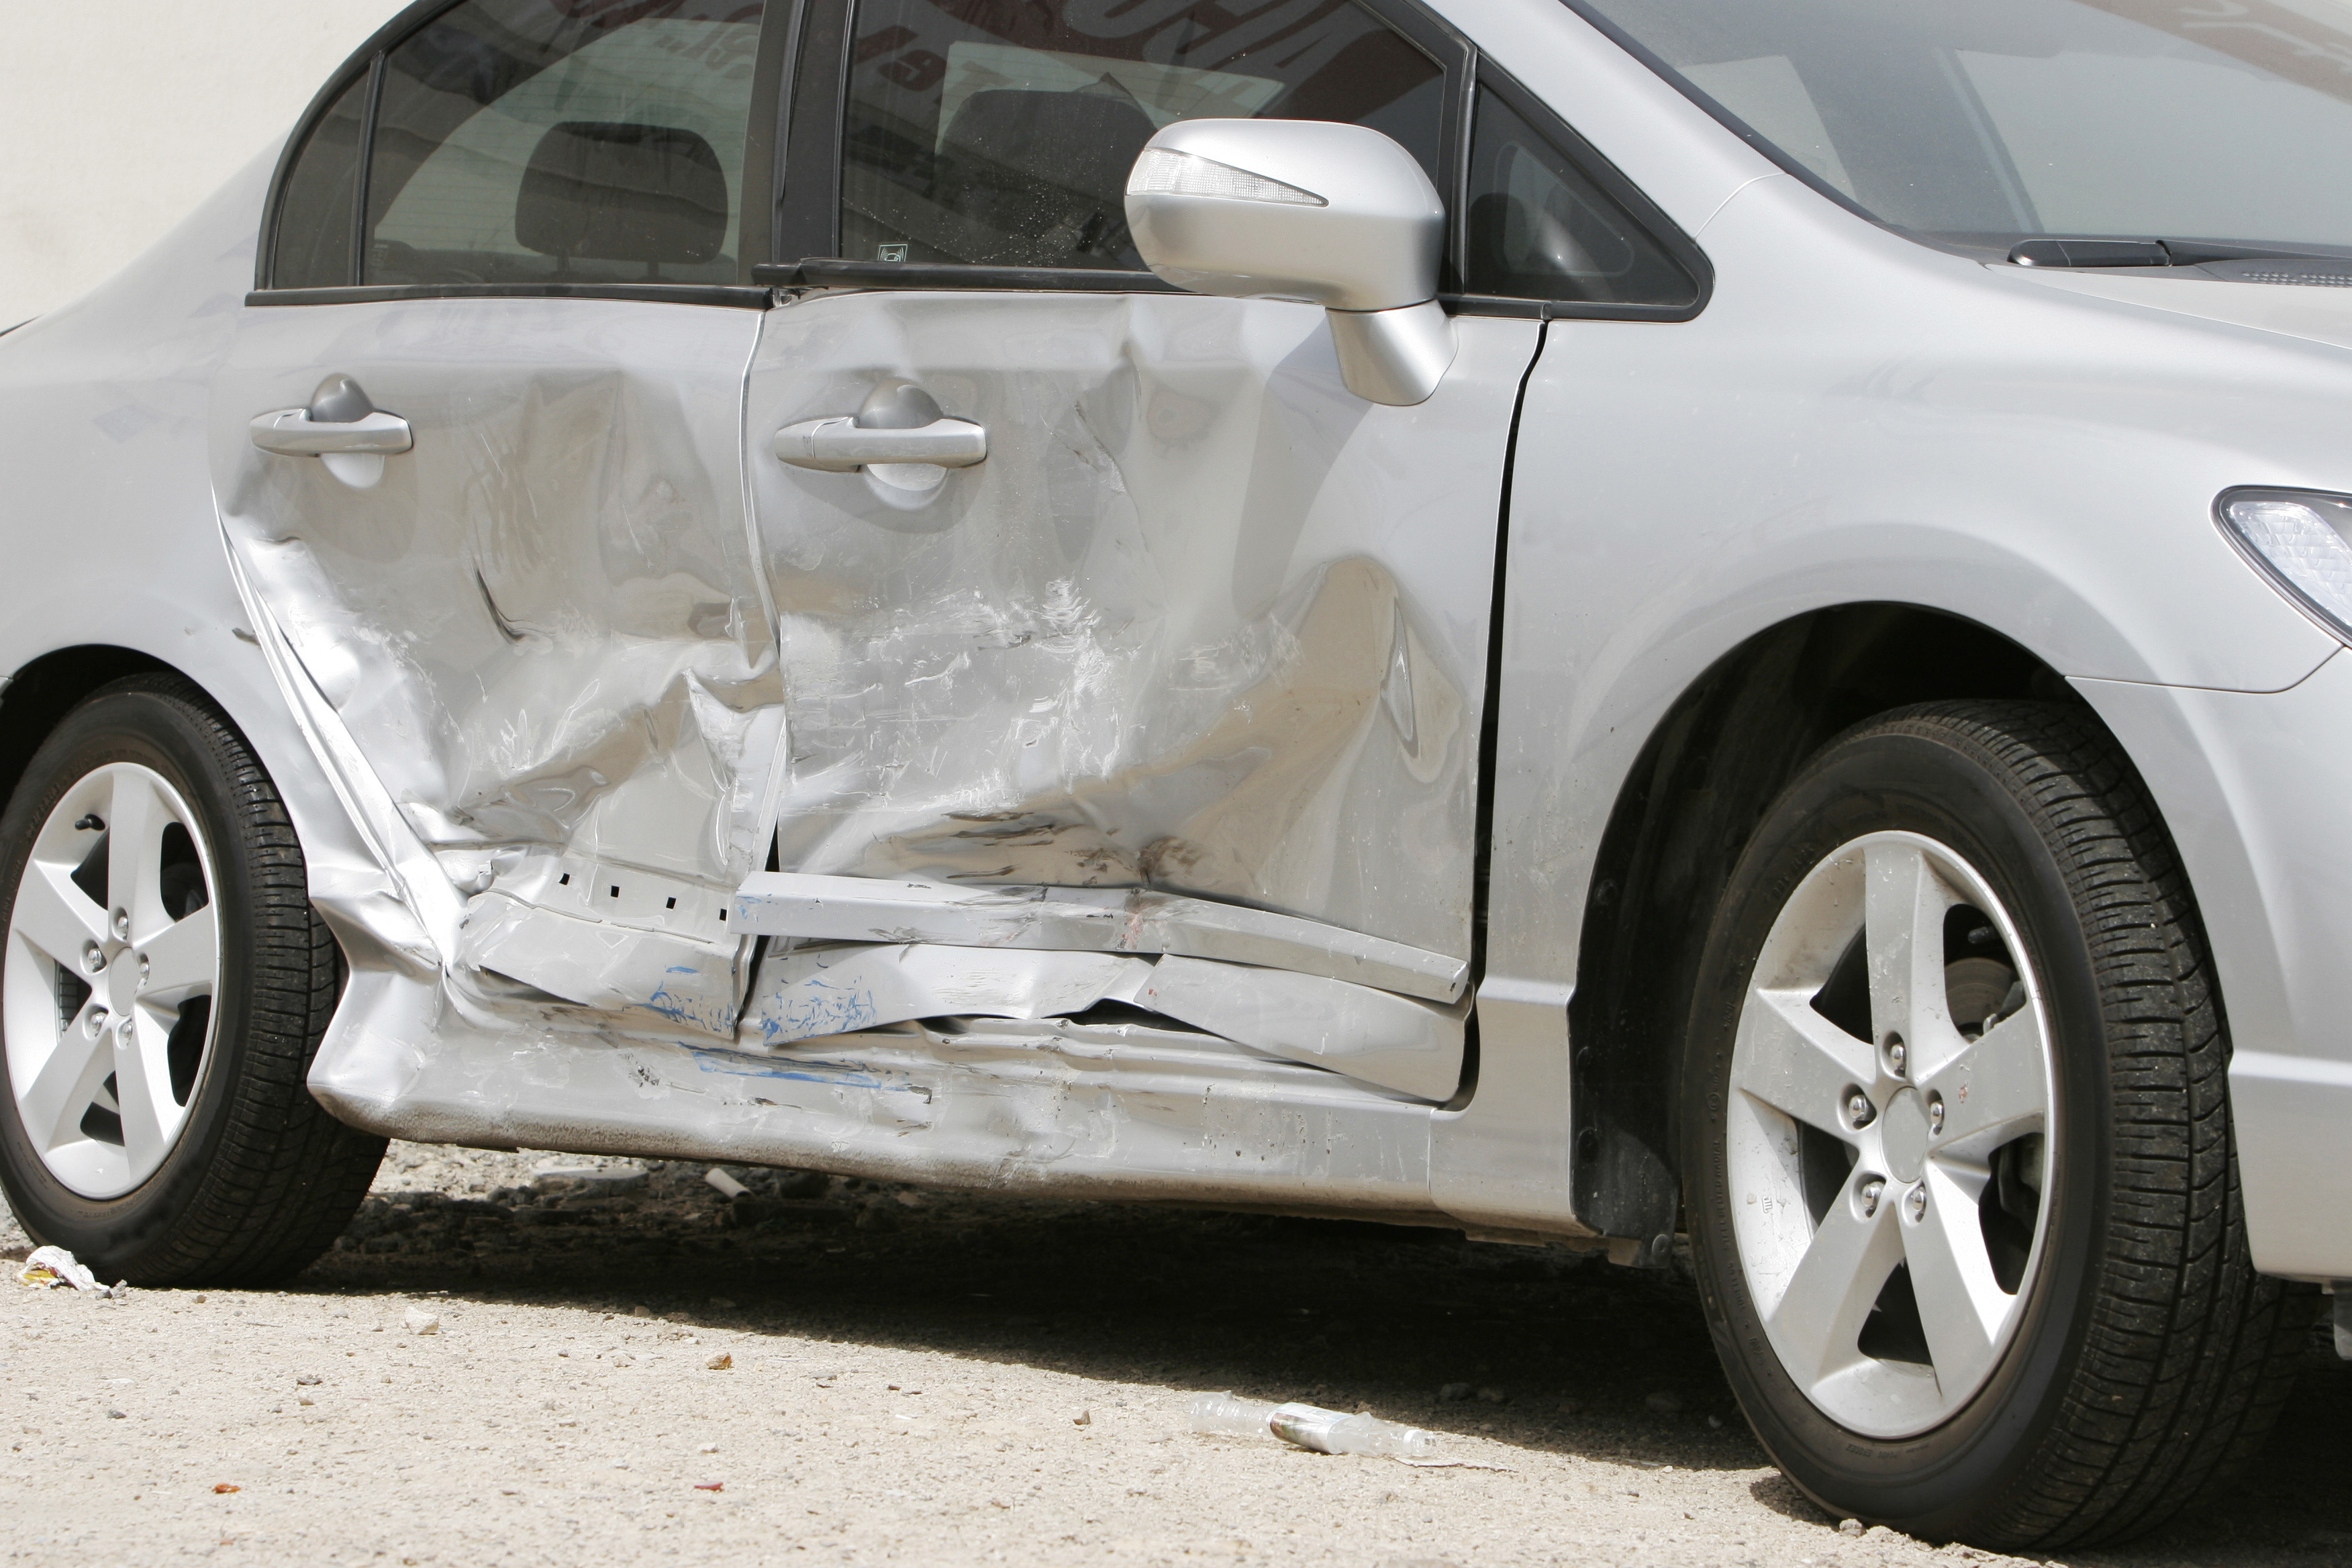 A silver sedan with side impact damage in need of side impact collision repair in Colorado Springs